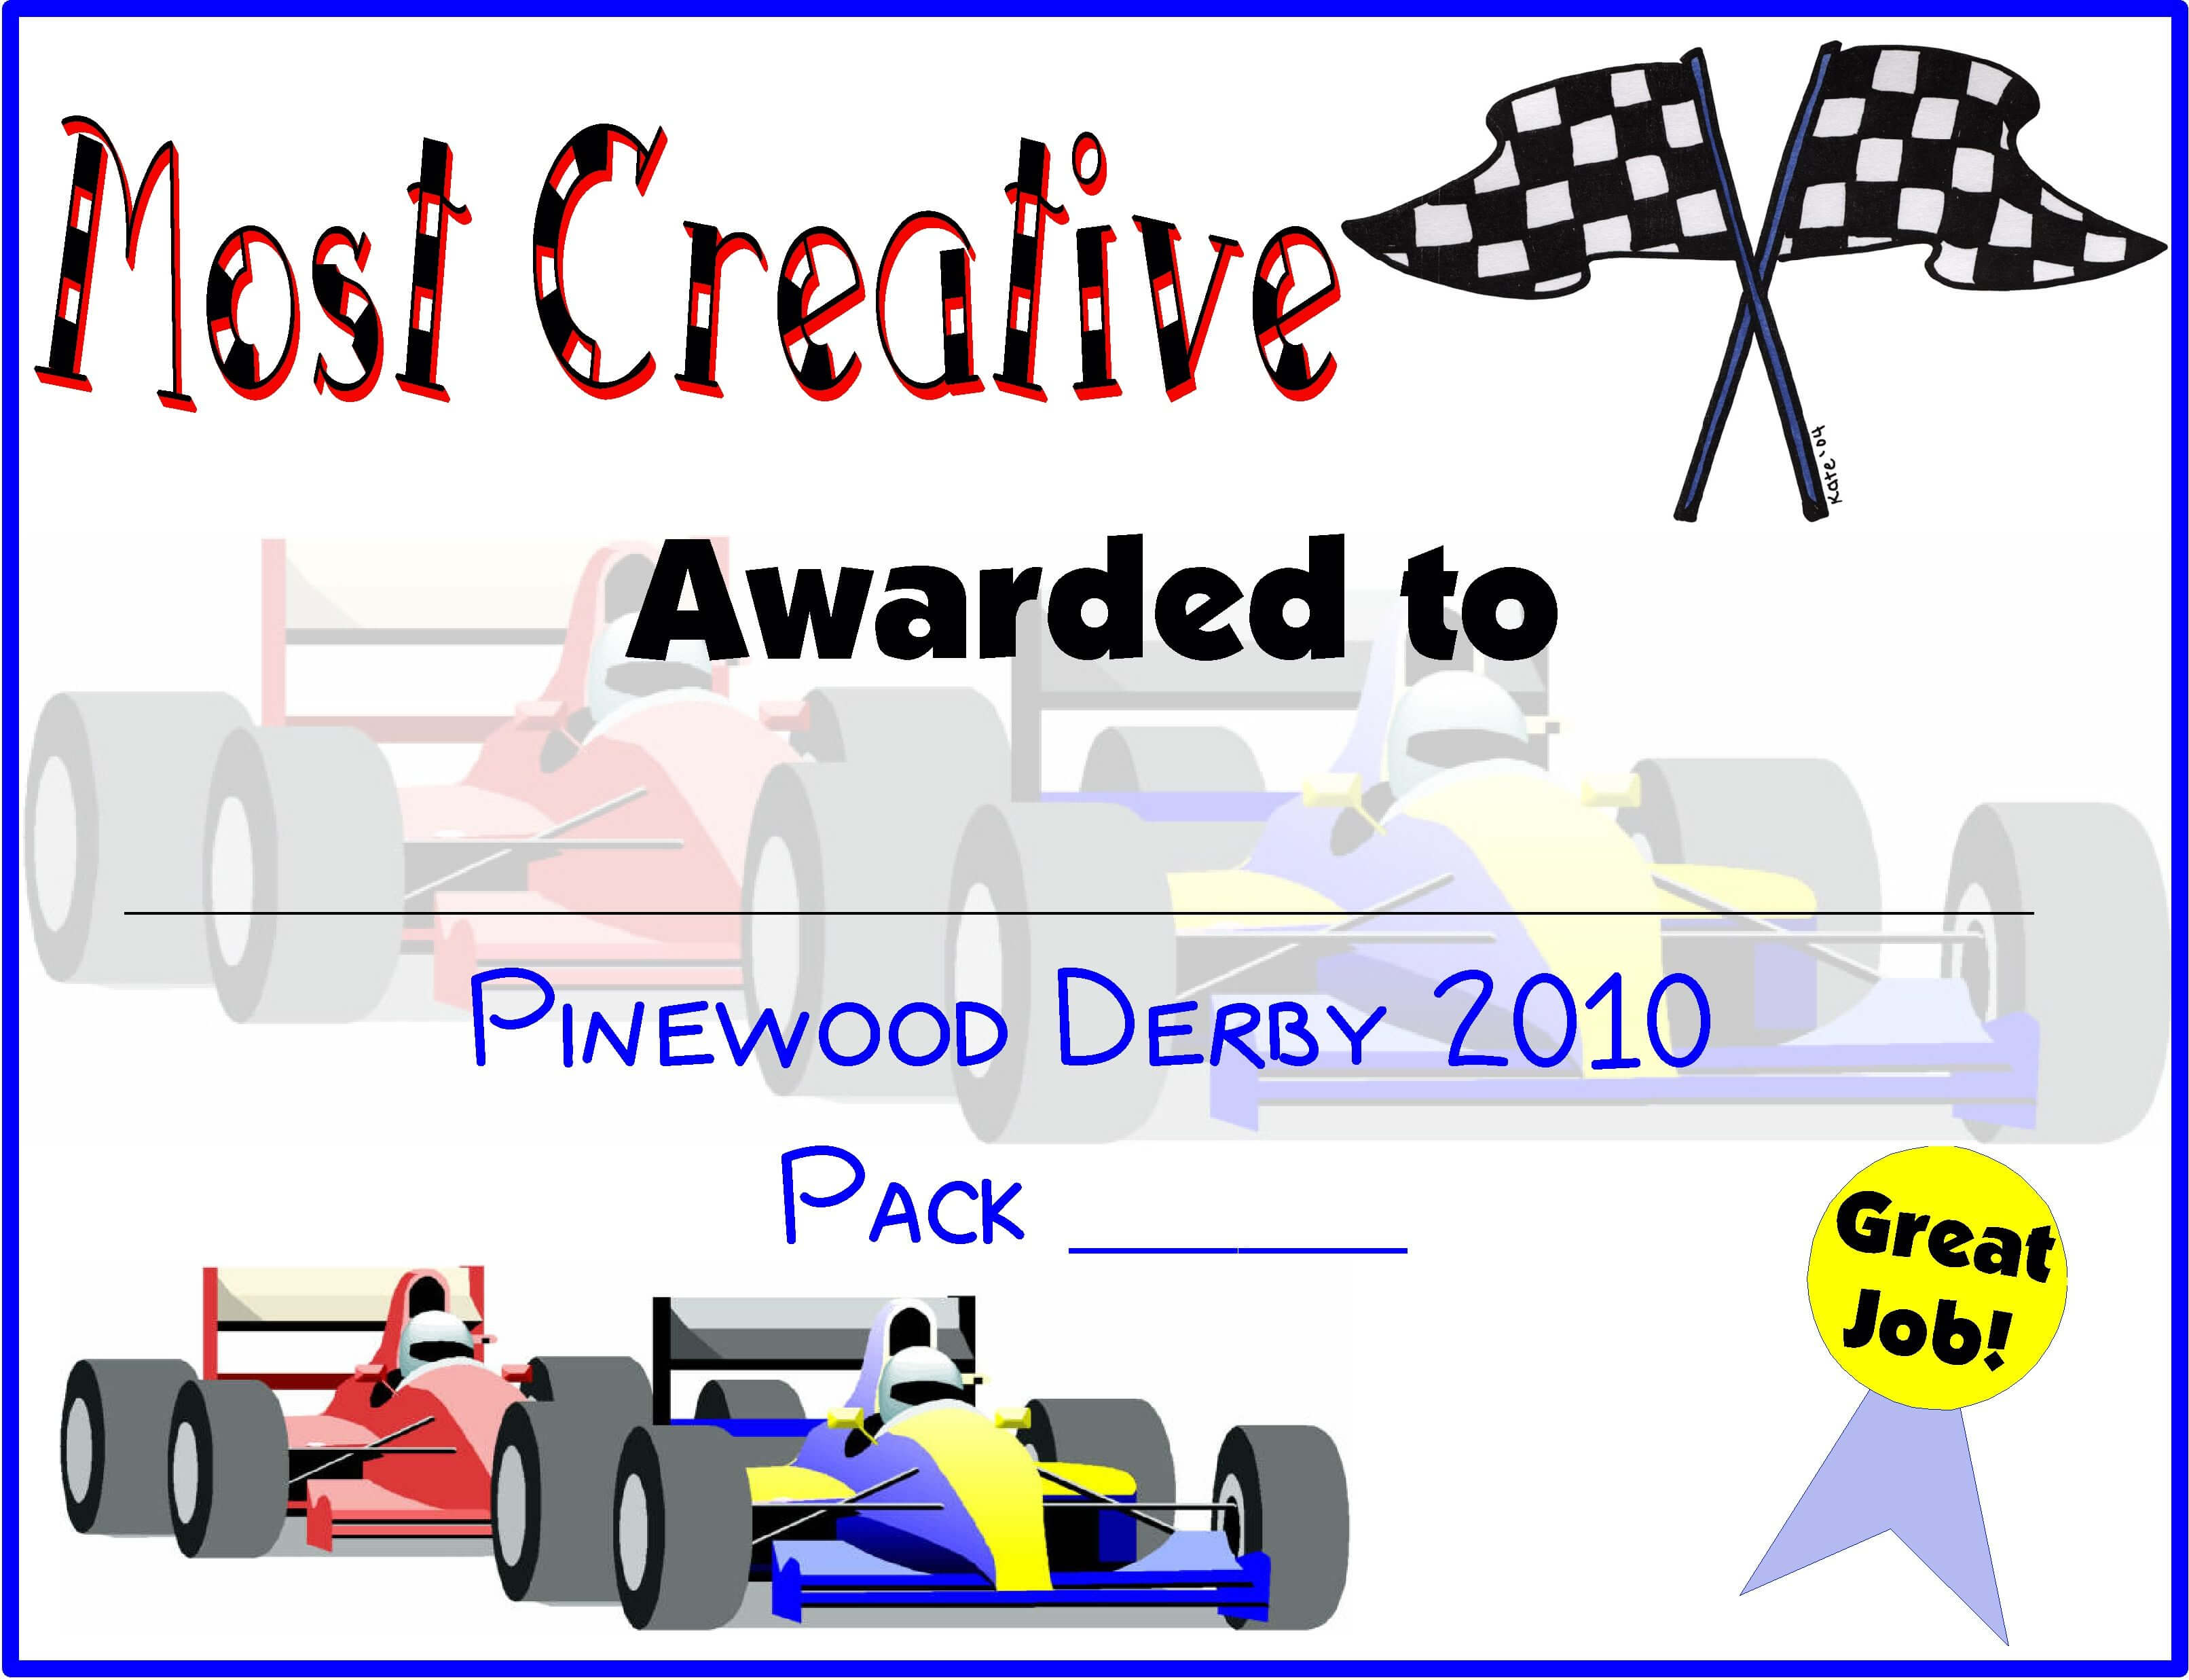 Pinewood Derby Certificates | Do Your Best! Cub Scouts | Cub With Pinewood Derby Certificate Template